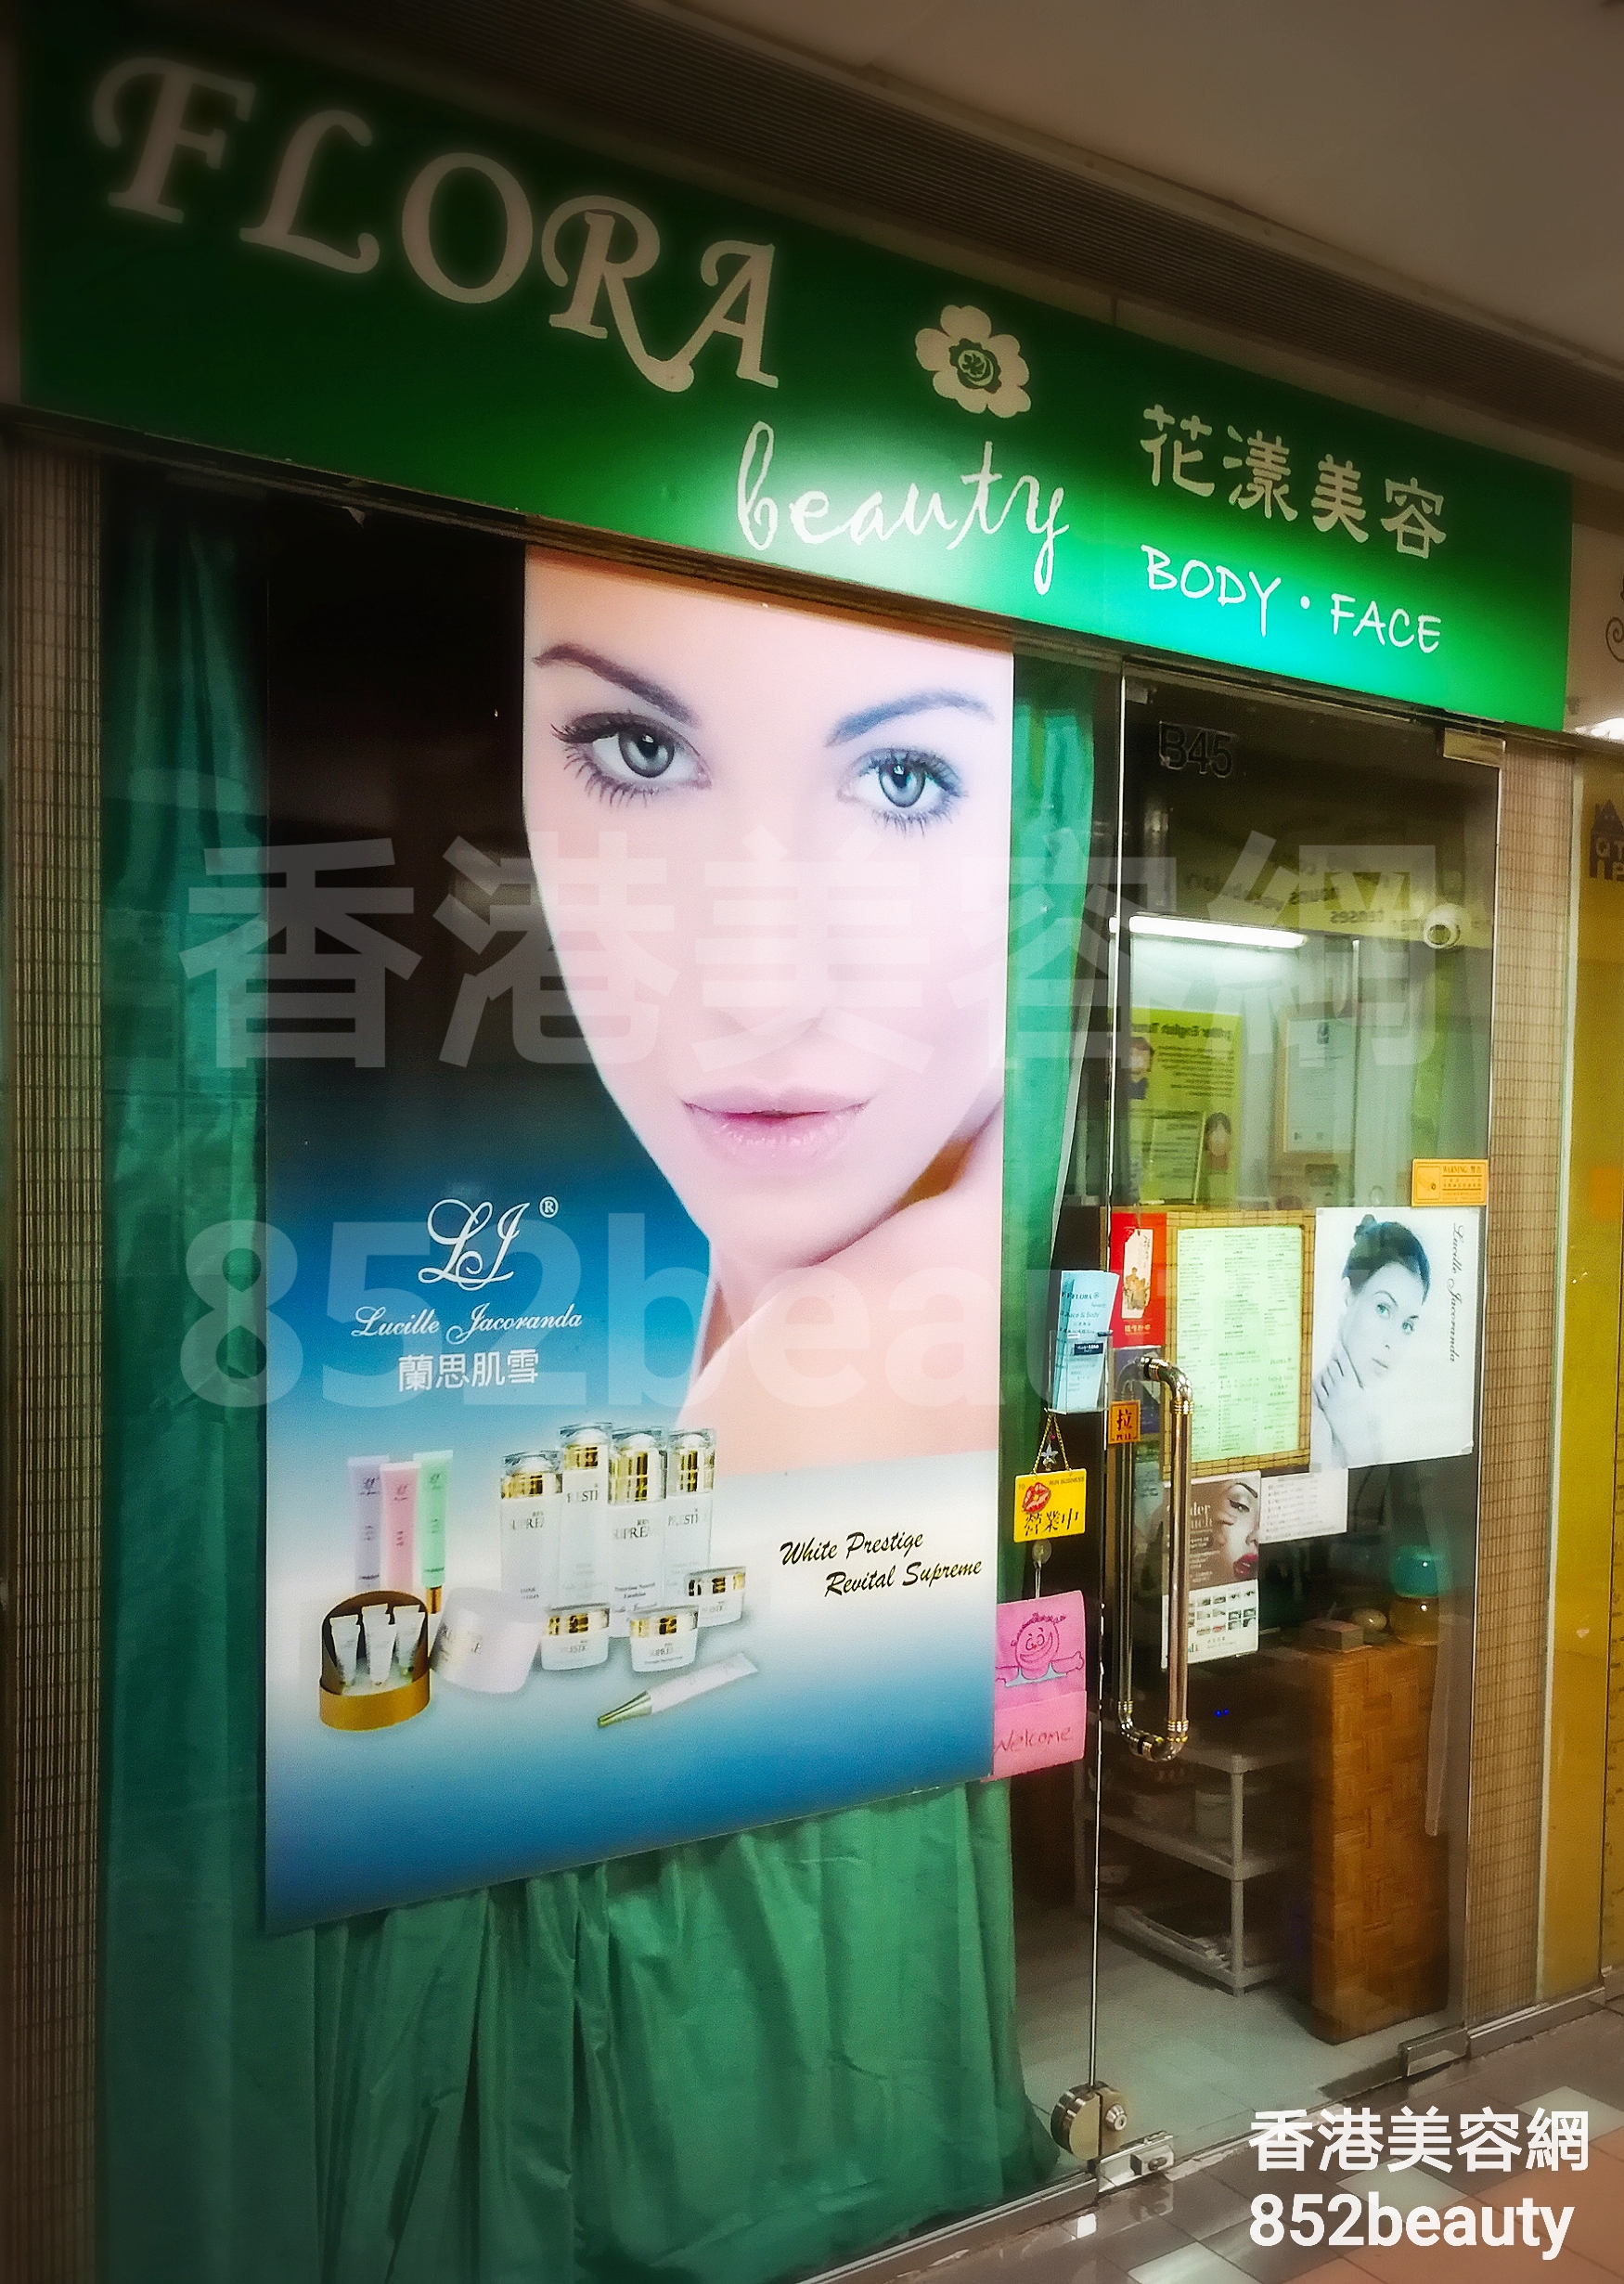 Hand and foot care: FLORA beauty 花漾美容